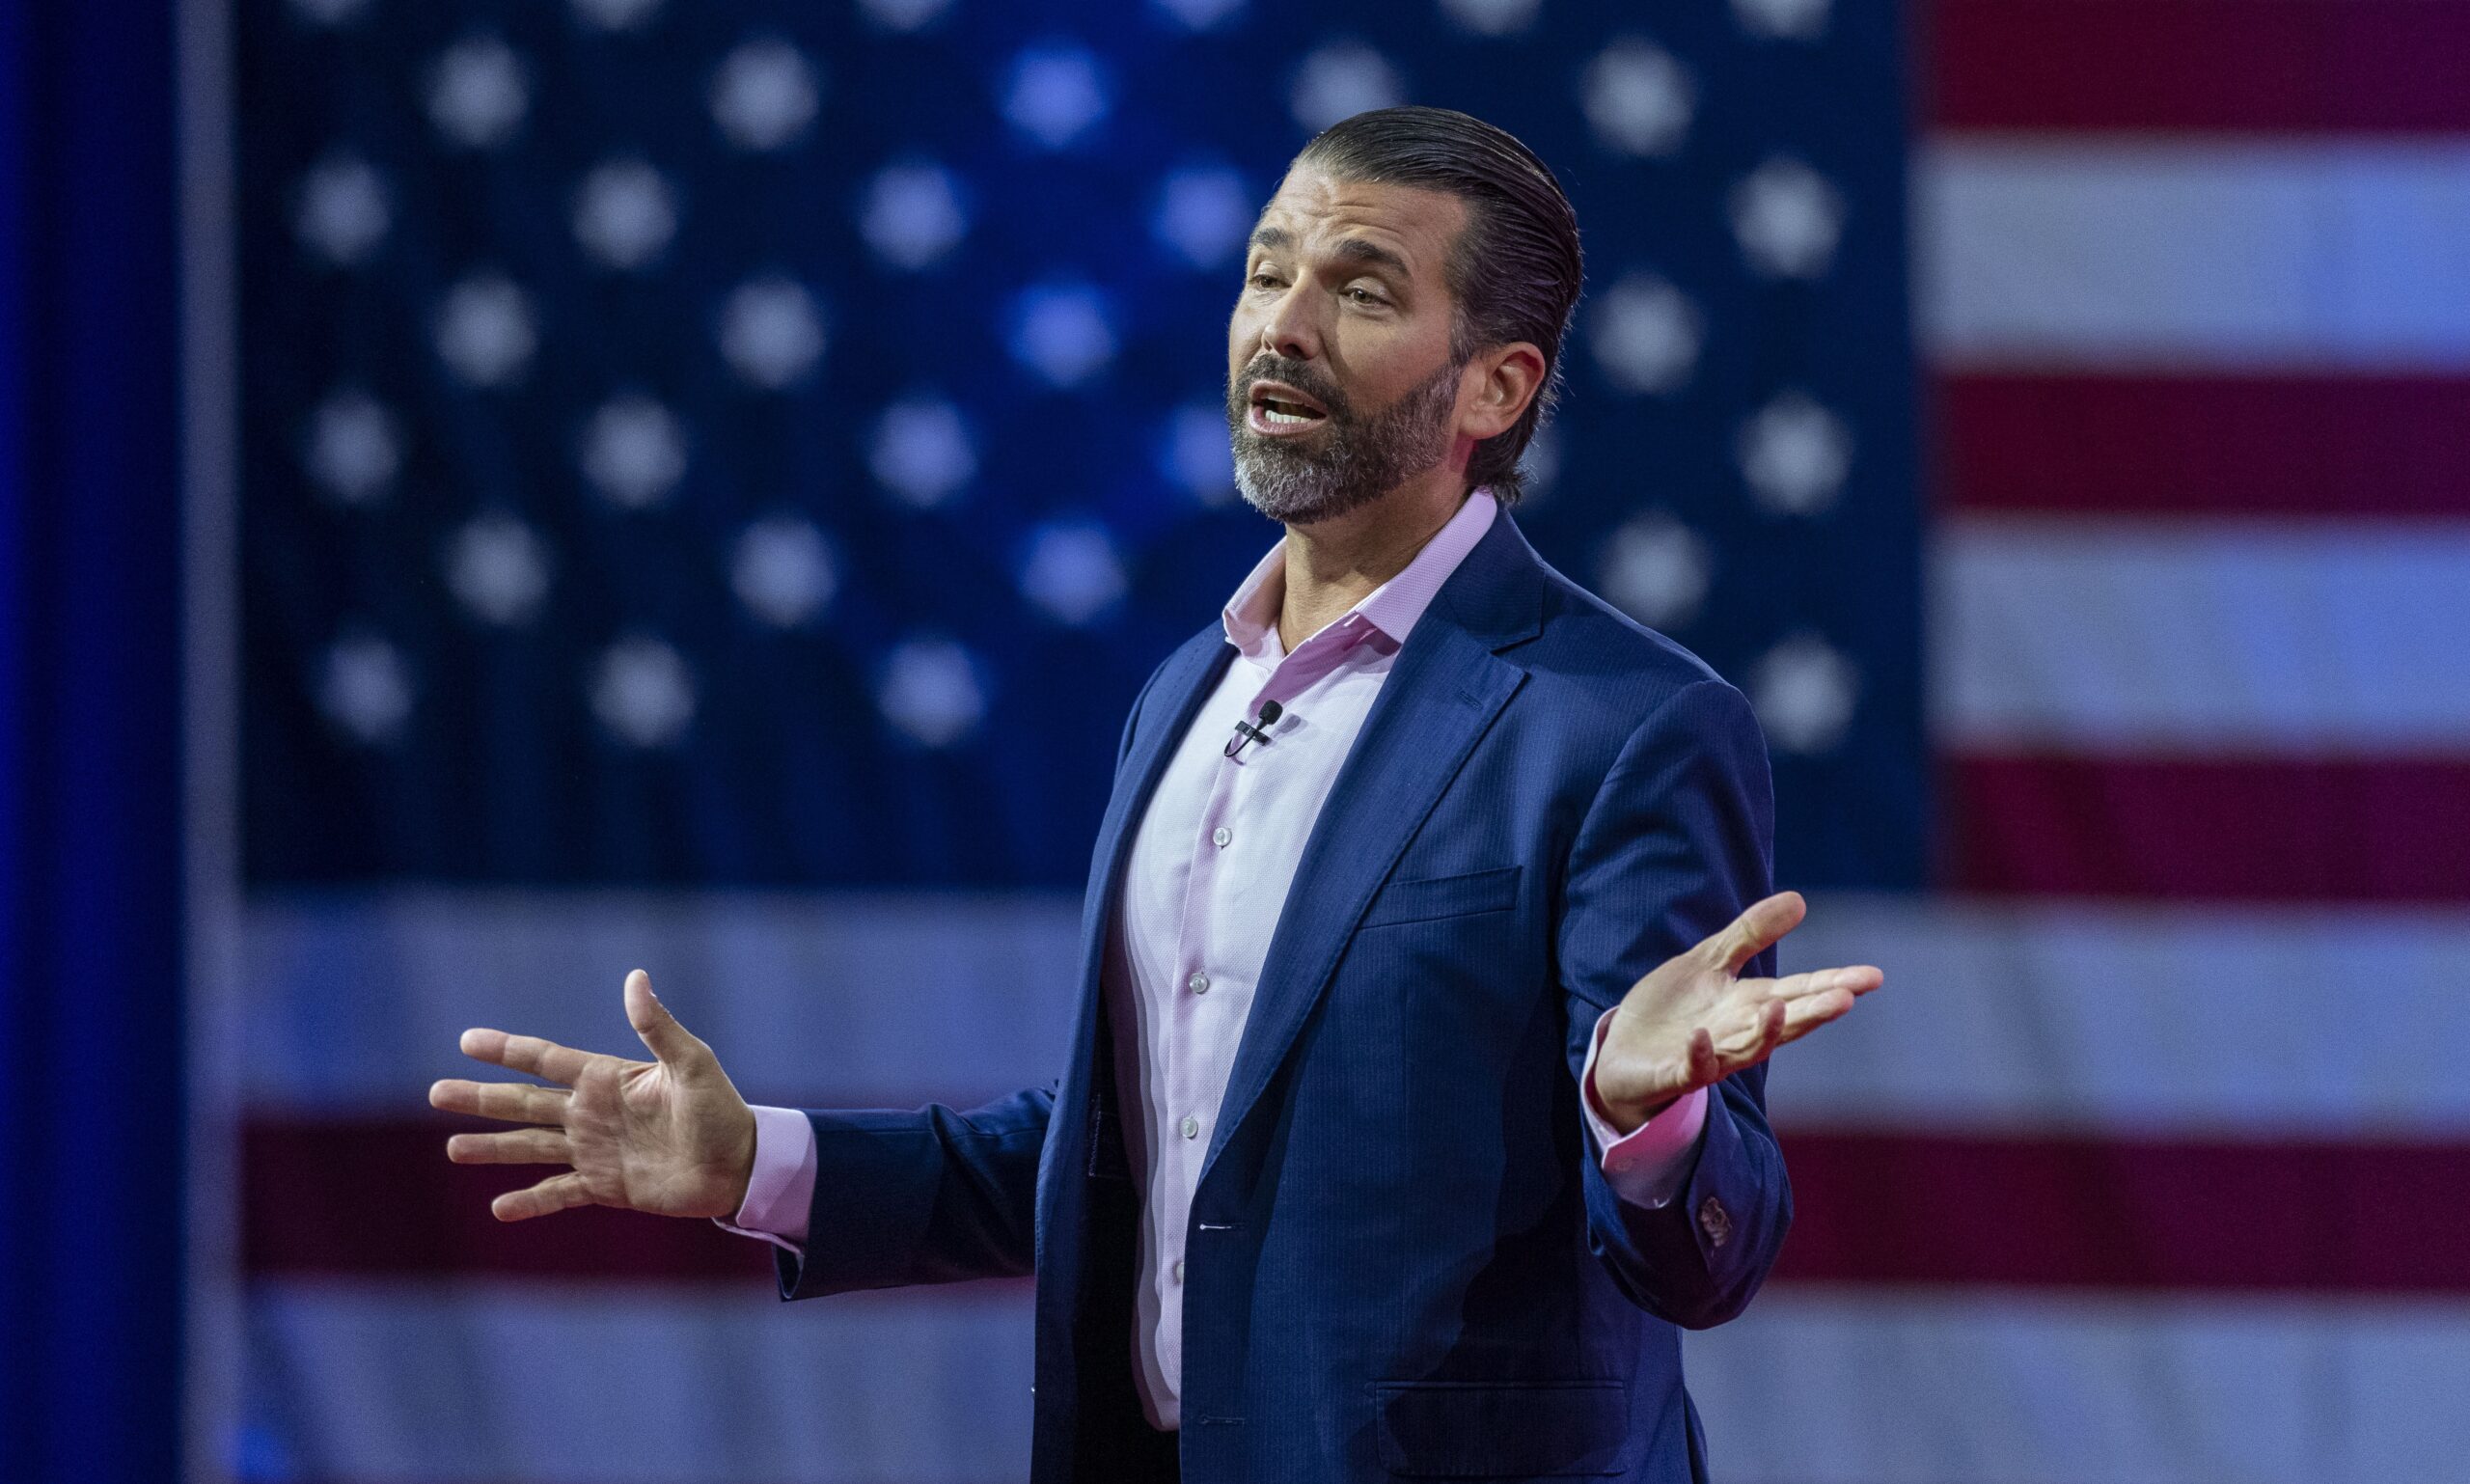 Trump Jr. Shares Clip Mocking Speaker Johnson For Saying The U.S. Isn’t Going to Let ‘Putin March Through Europe’